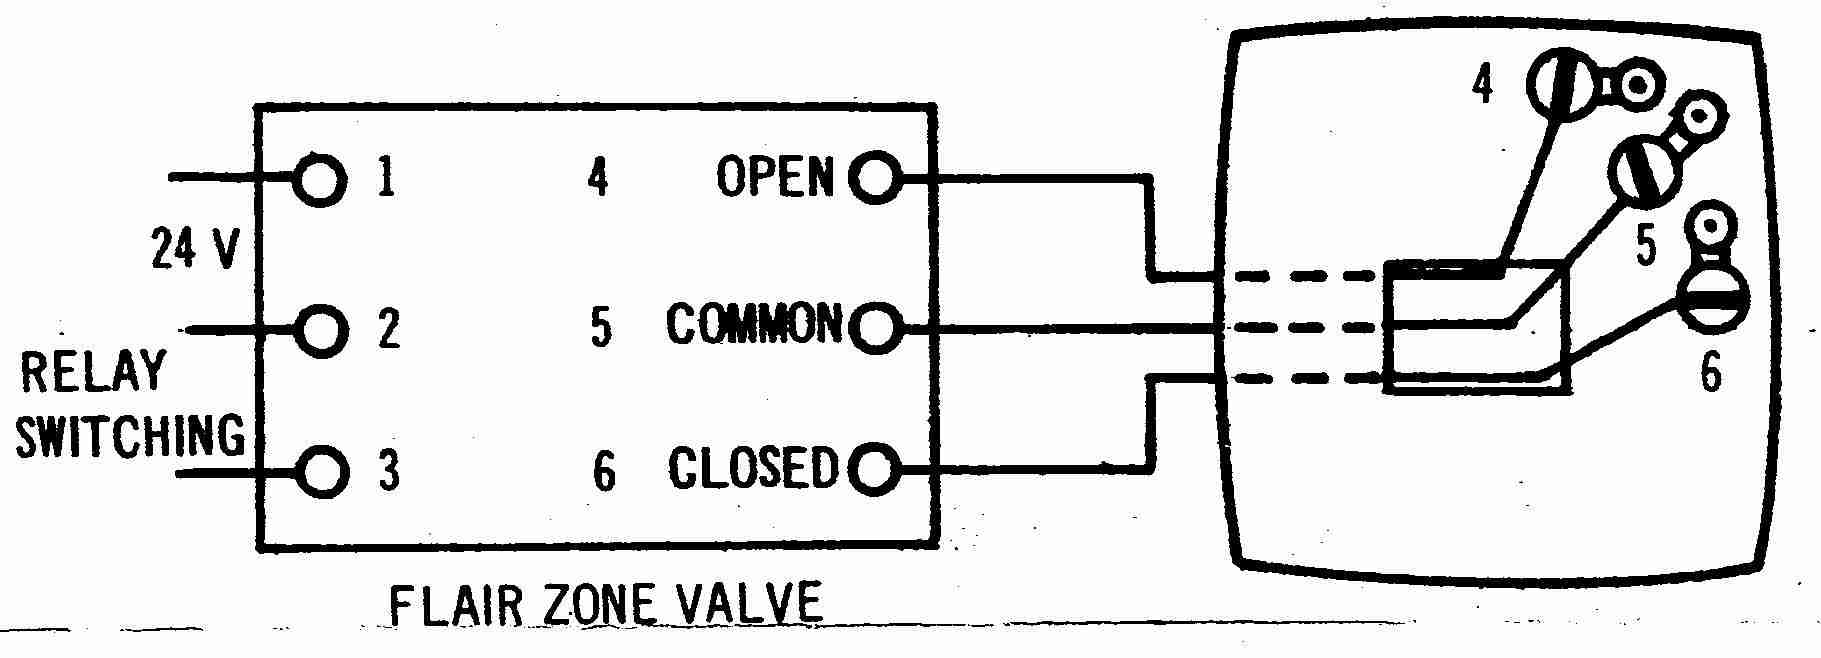 Room Thermostat Wiring Diagrams For Hvac Systems - Thermostat Wiring Diagram